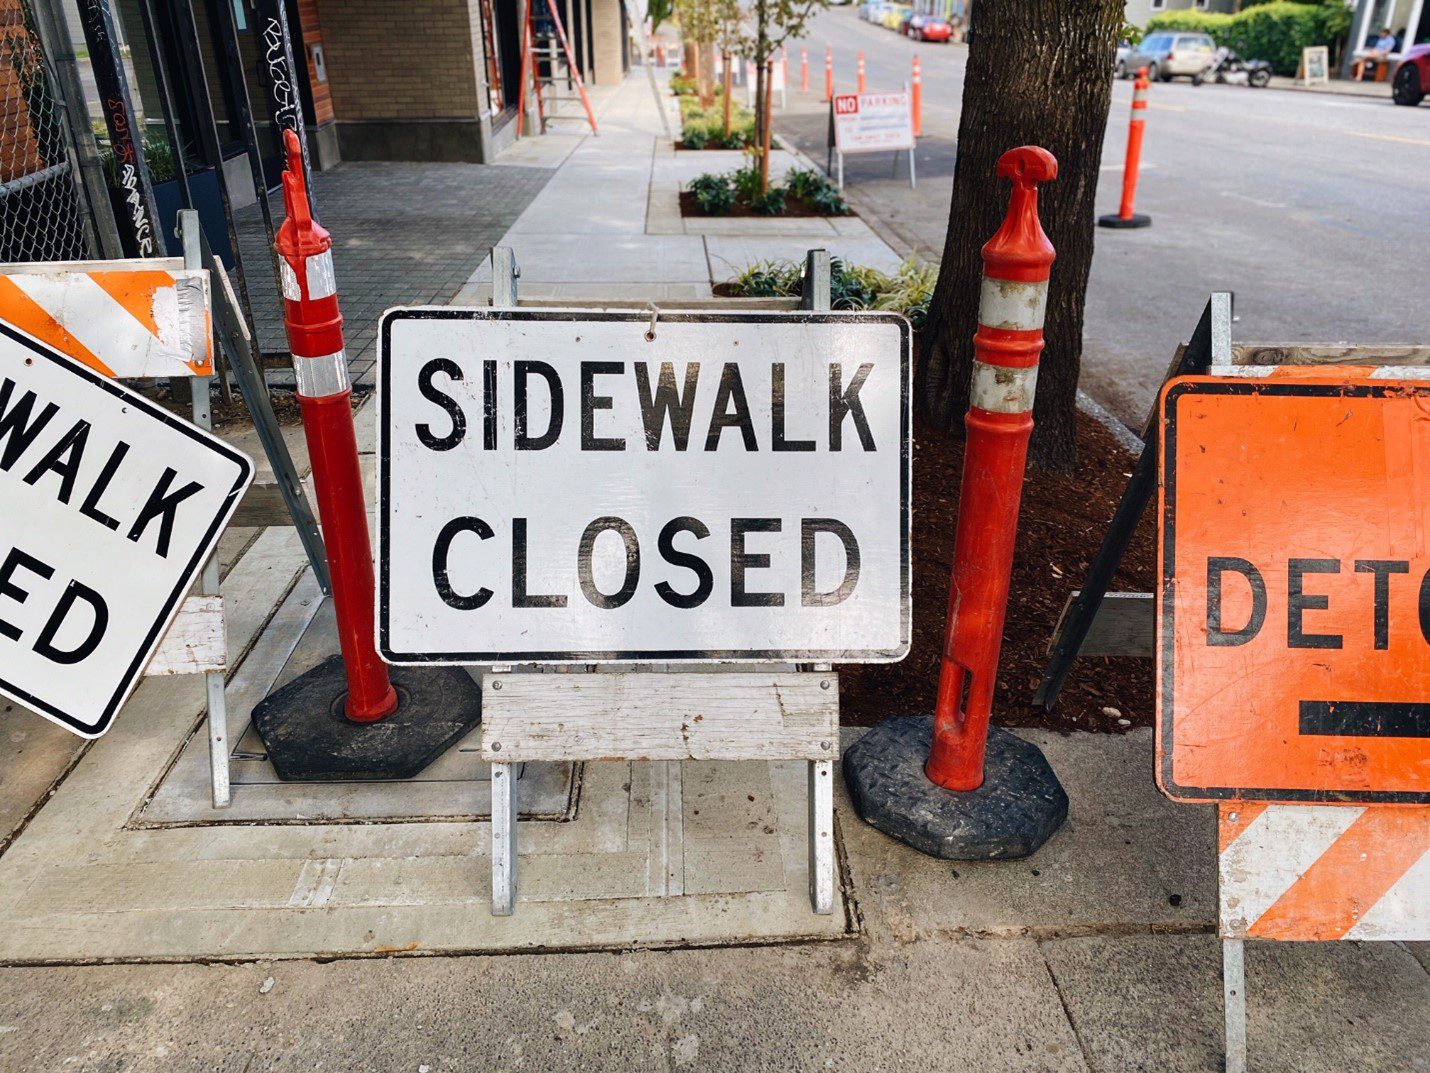 A large white sign indicates that a sidewalk is closed ahead. Next to it are several orange signs and orange vertical construction markers.